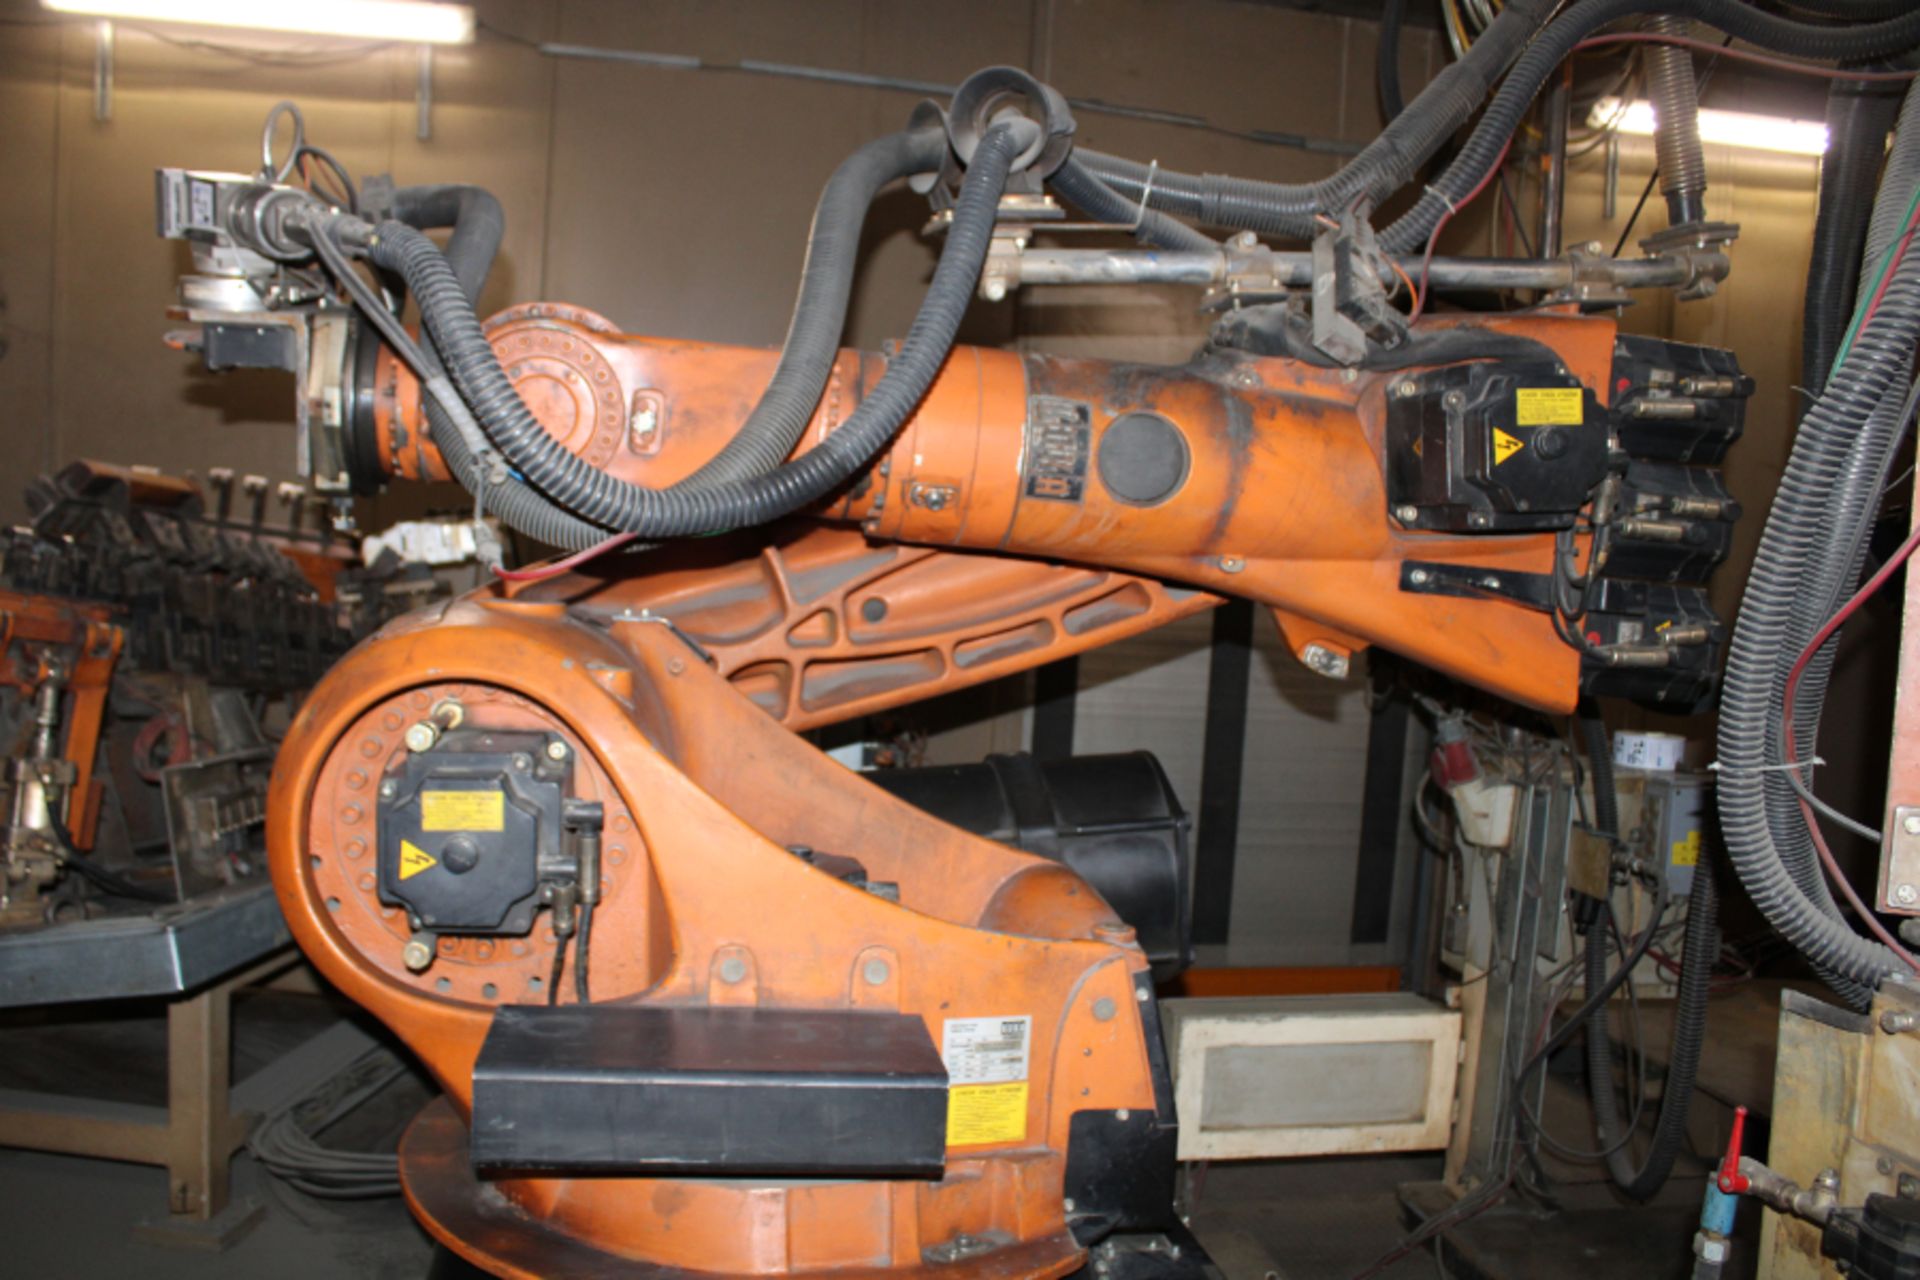 Kuka KR-150 Robot, Maximum Reach: 2,700 mm, Rated Payload: 150 Kg, with Robot Controller, New 2003 - Image 3 of 5